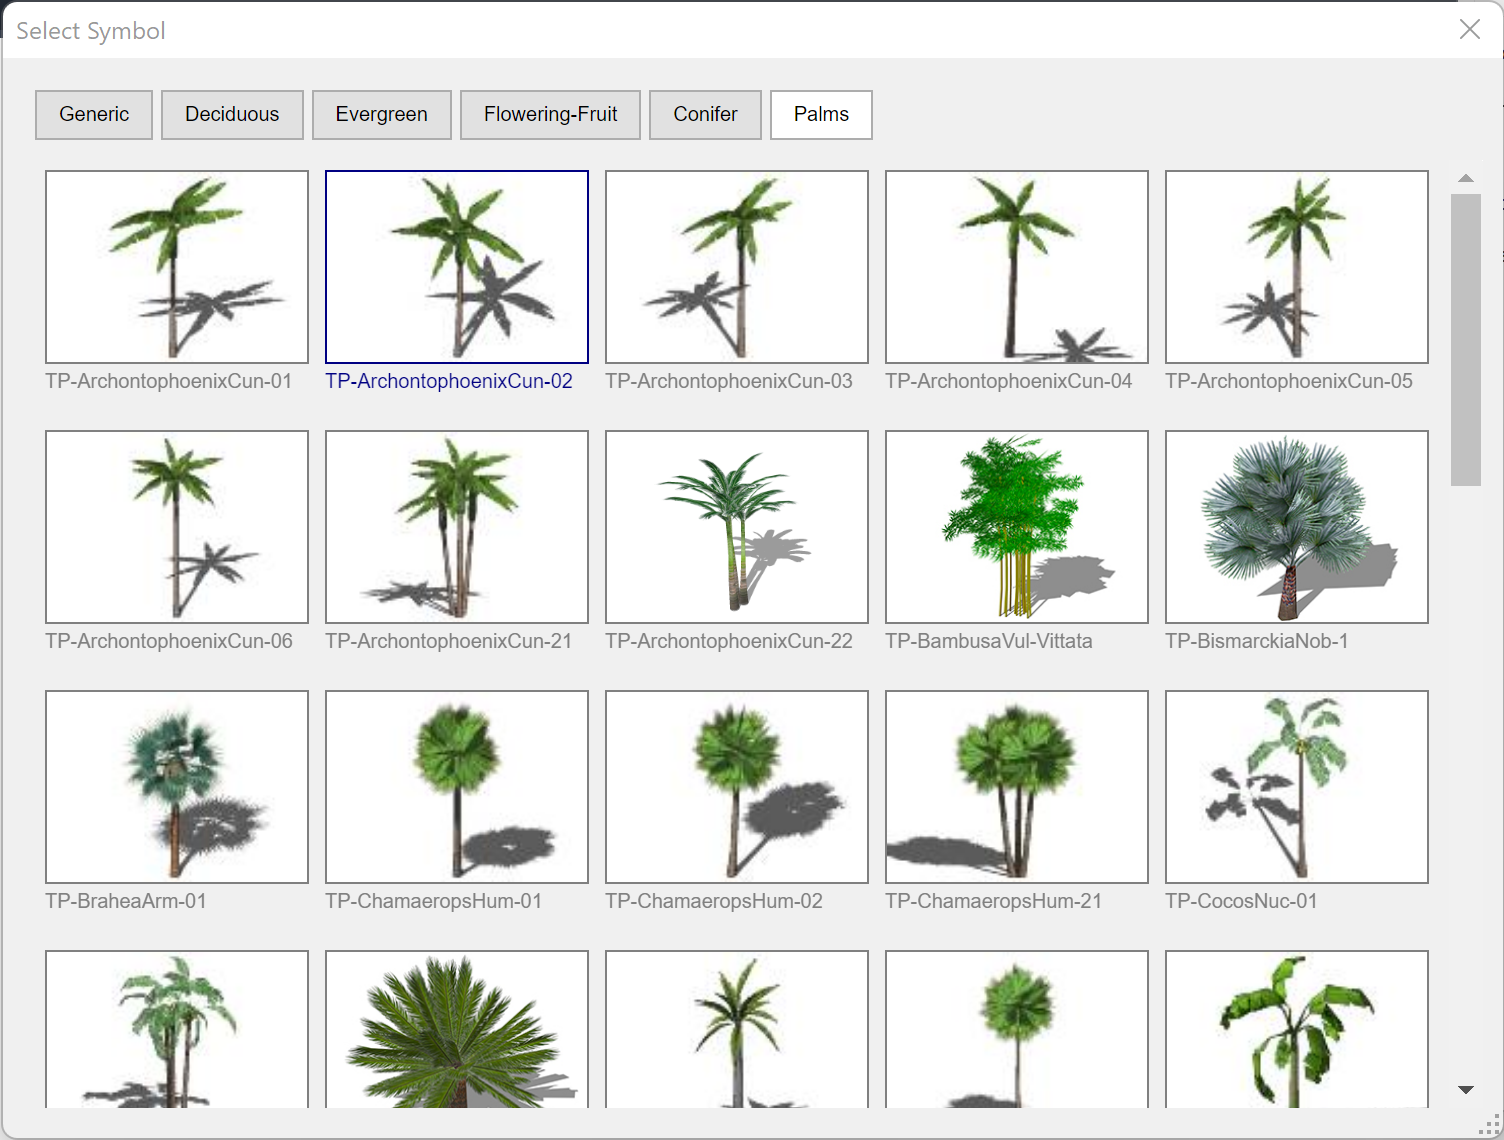 Selecting a 3D symbol for a plant